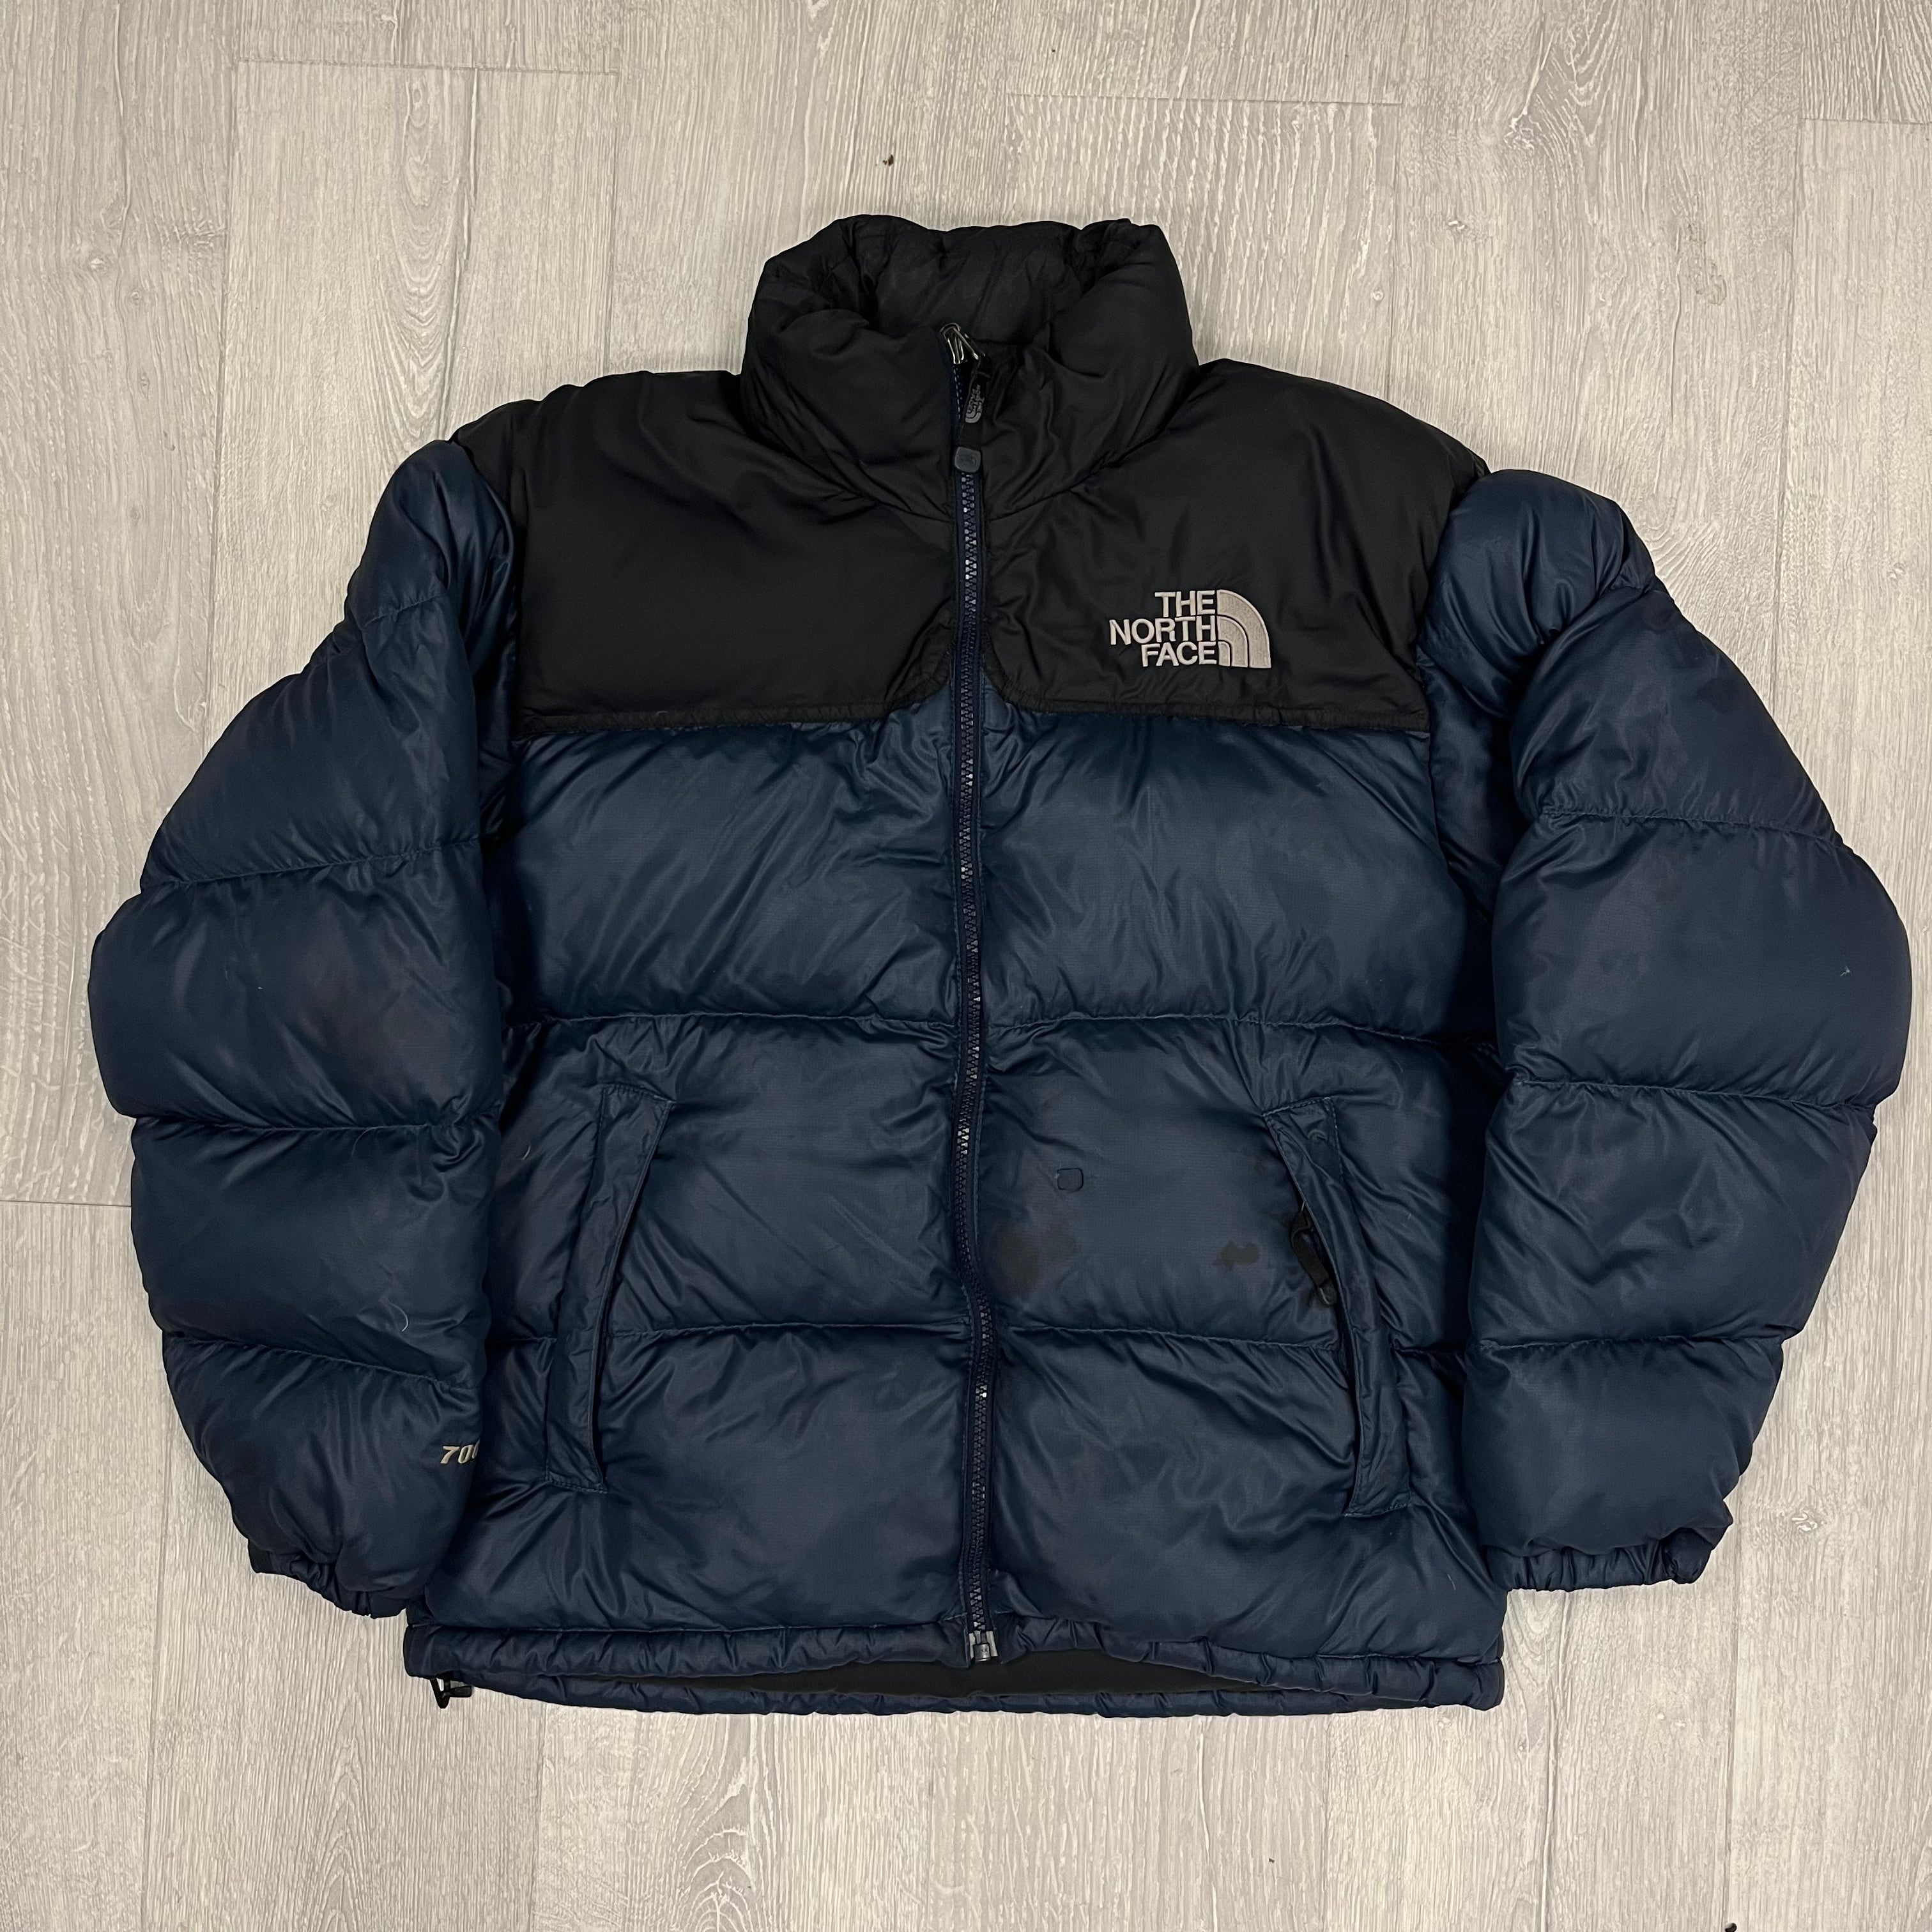 The North Face Navy Blue Puffer Jacket WITH STAIN AND REPAIR